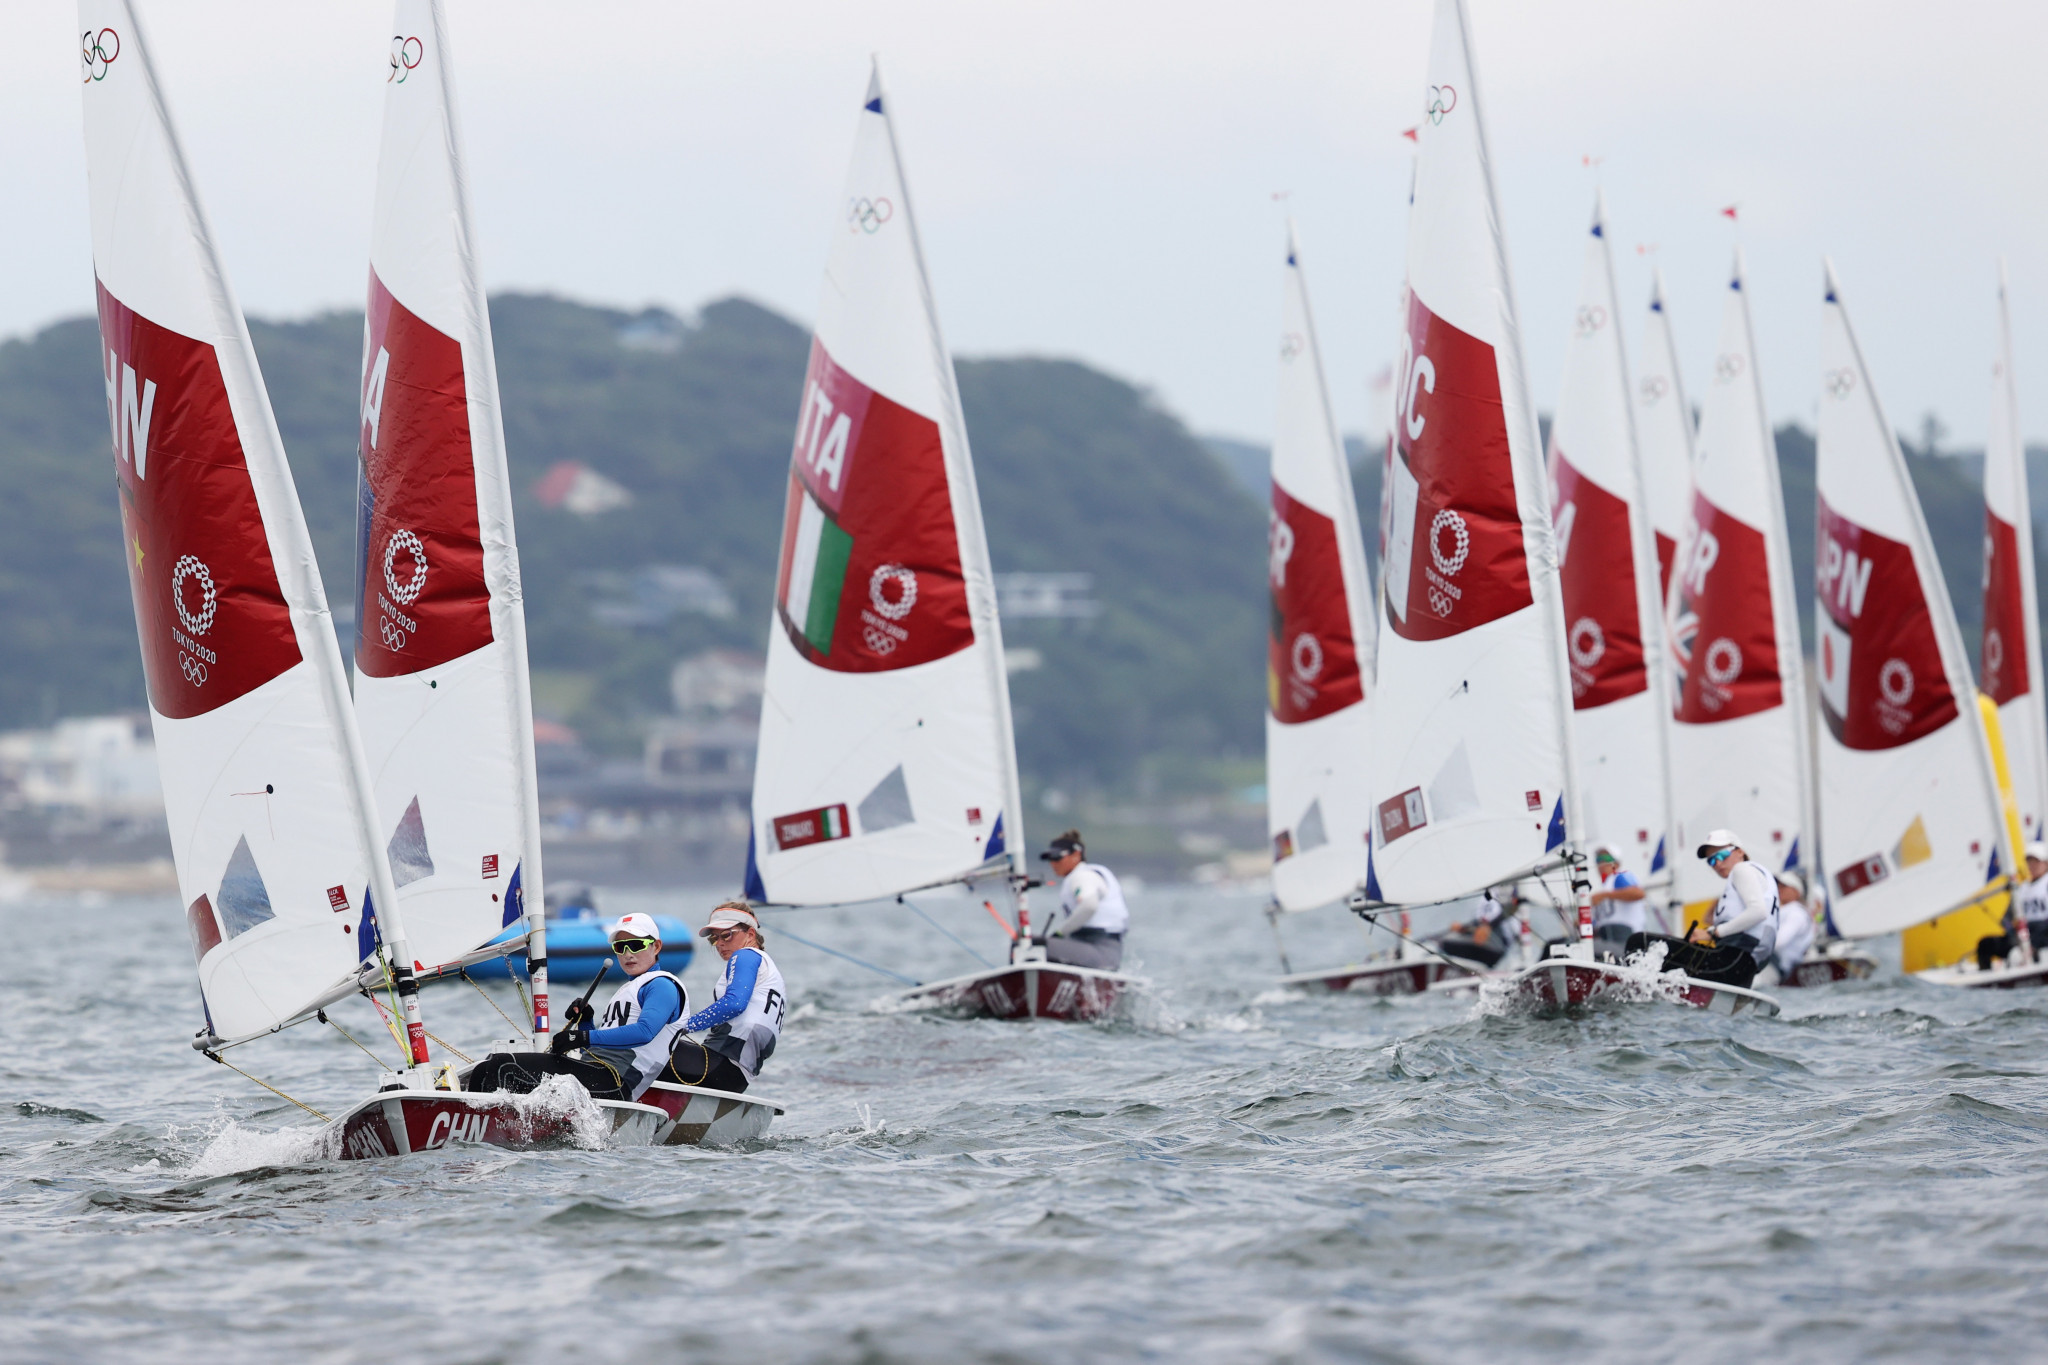 The race for the men's and women's titles are heating up at the ICLA 6 World Championships ©Getty Images